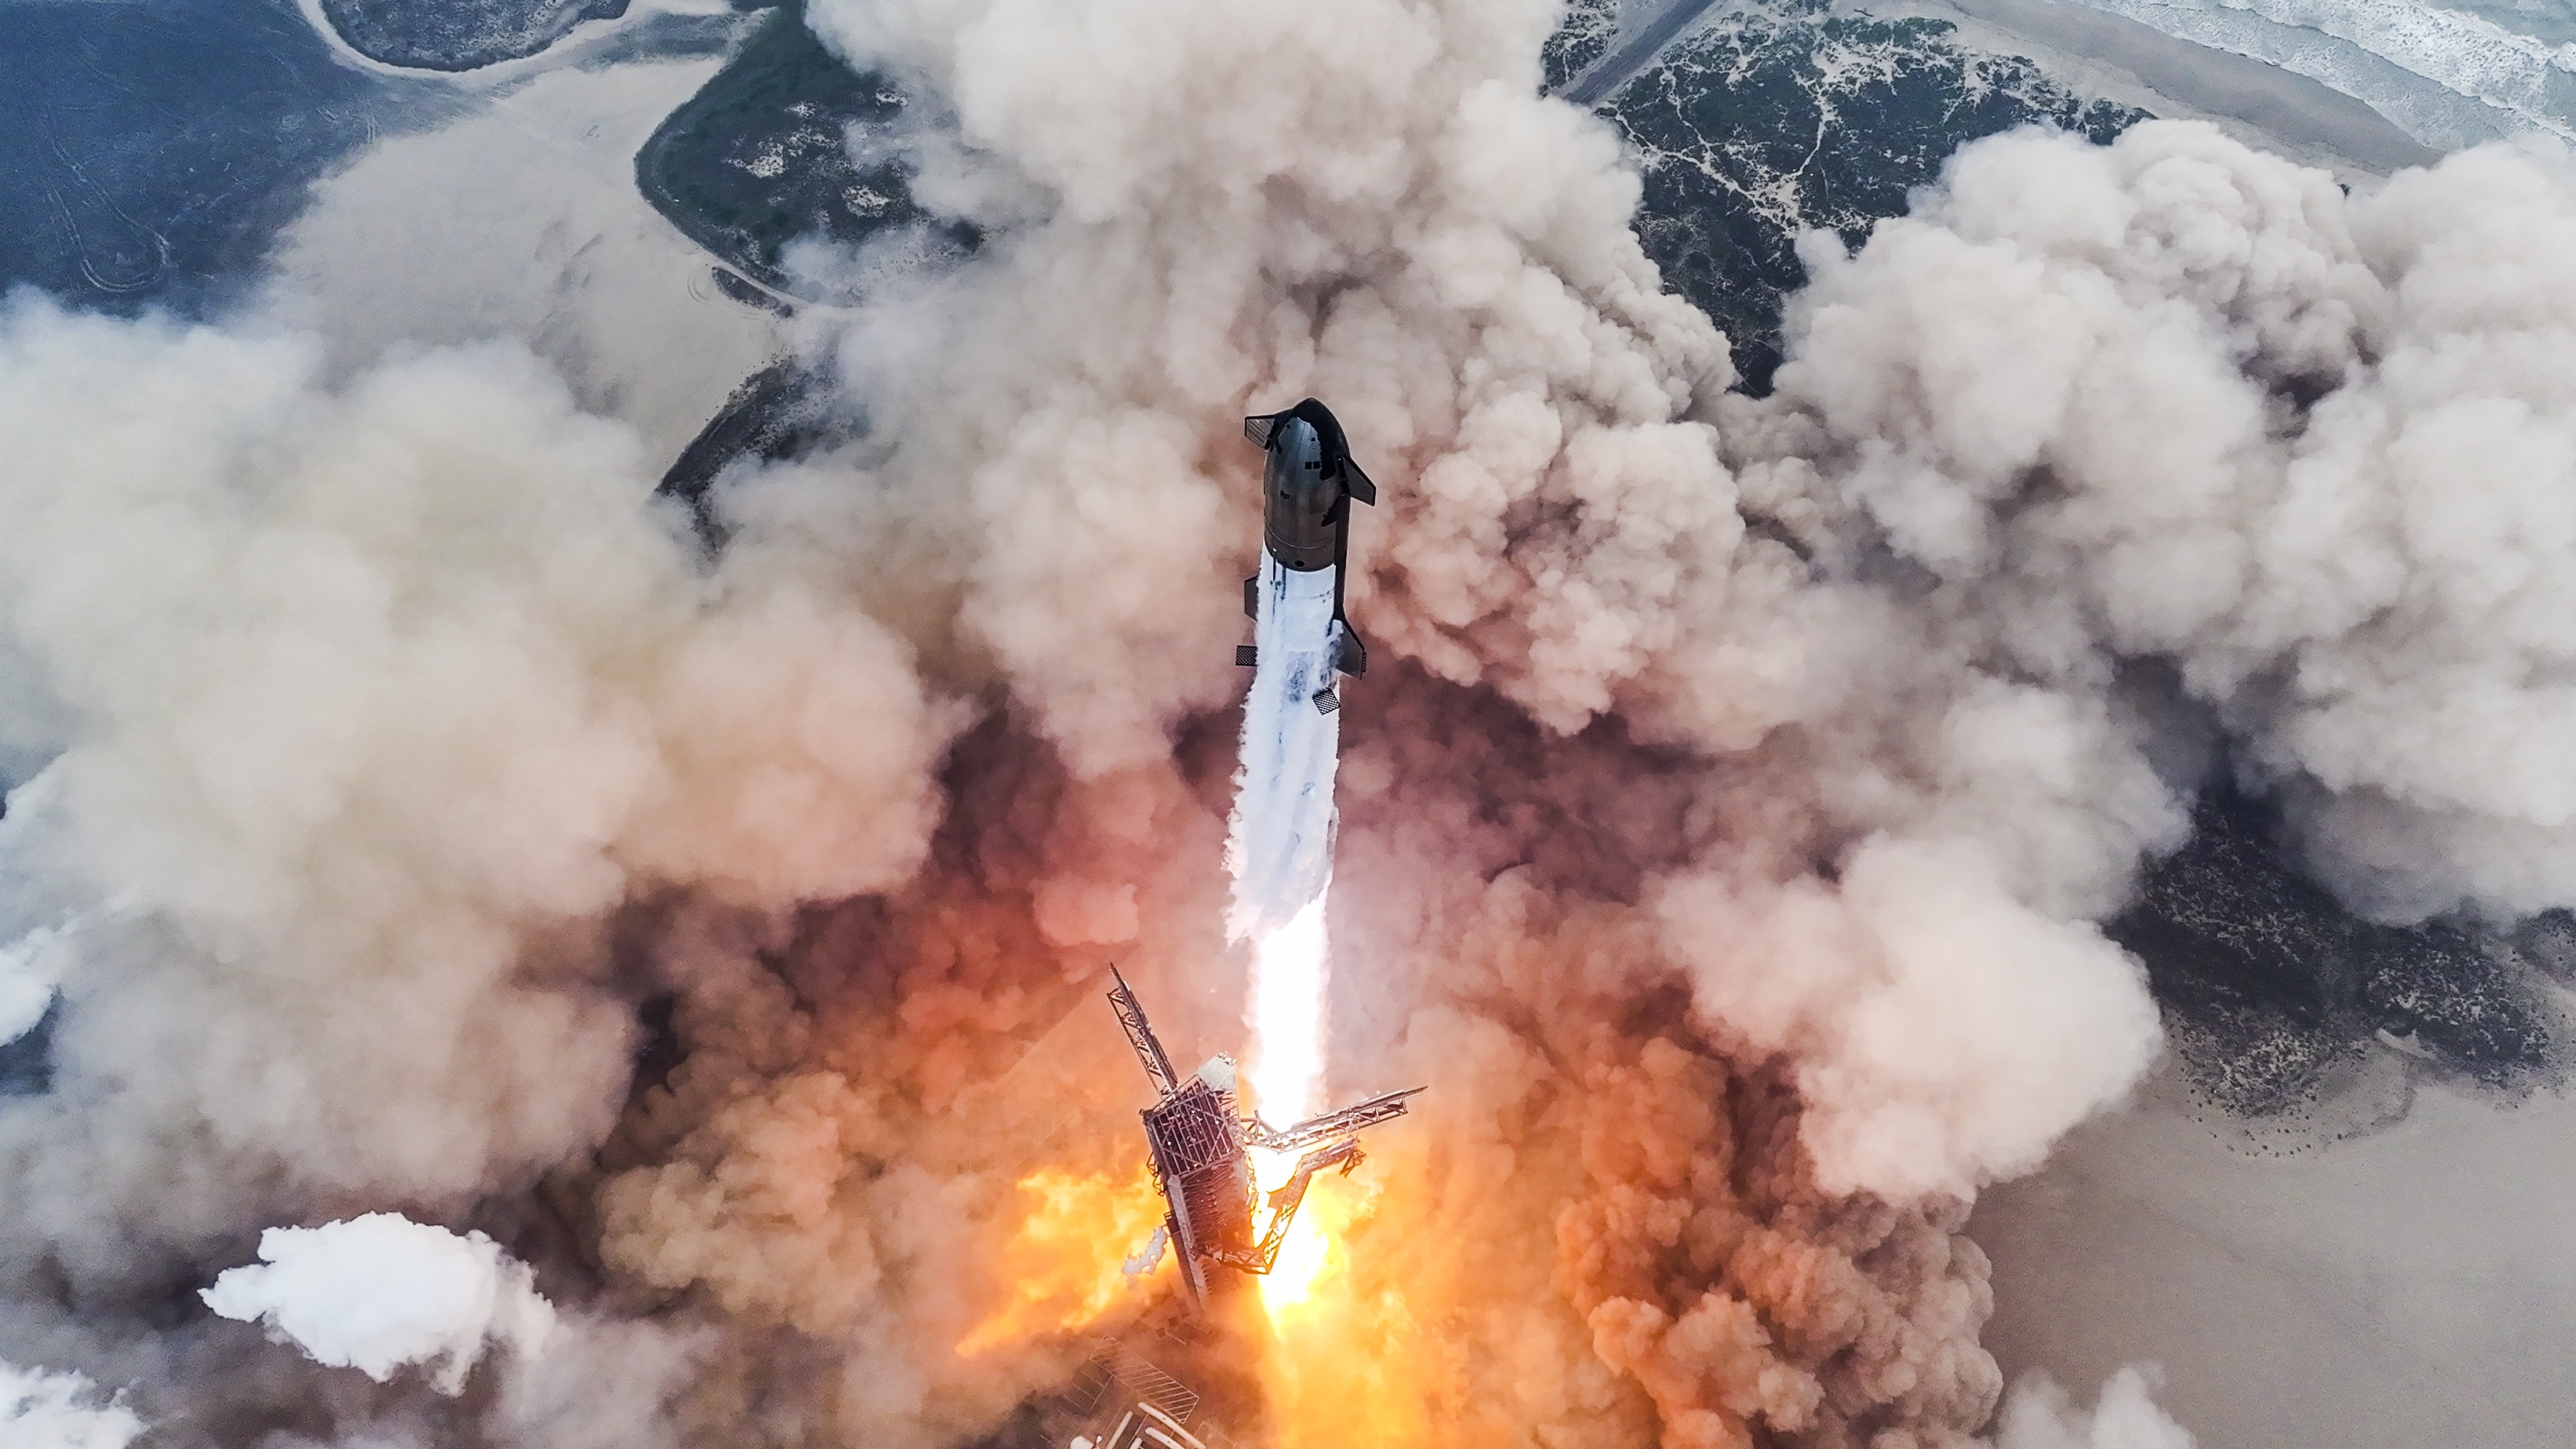 Starship lifts off June 6 on its fourth test flight from SpaceX’s launch facility at Boca Chica, Texas. Credit: SpaceX.